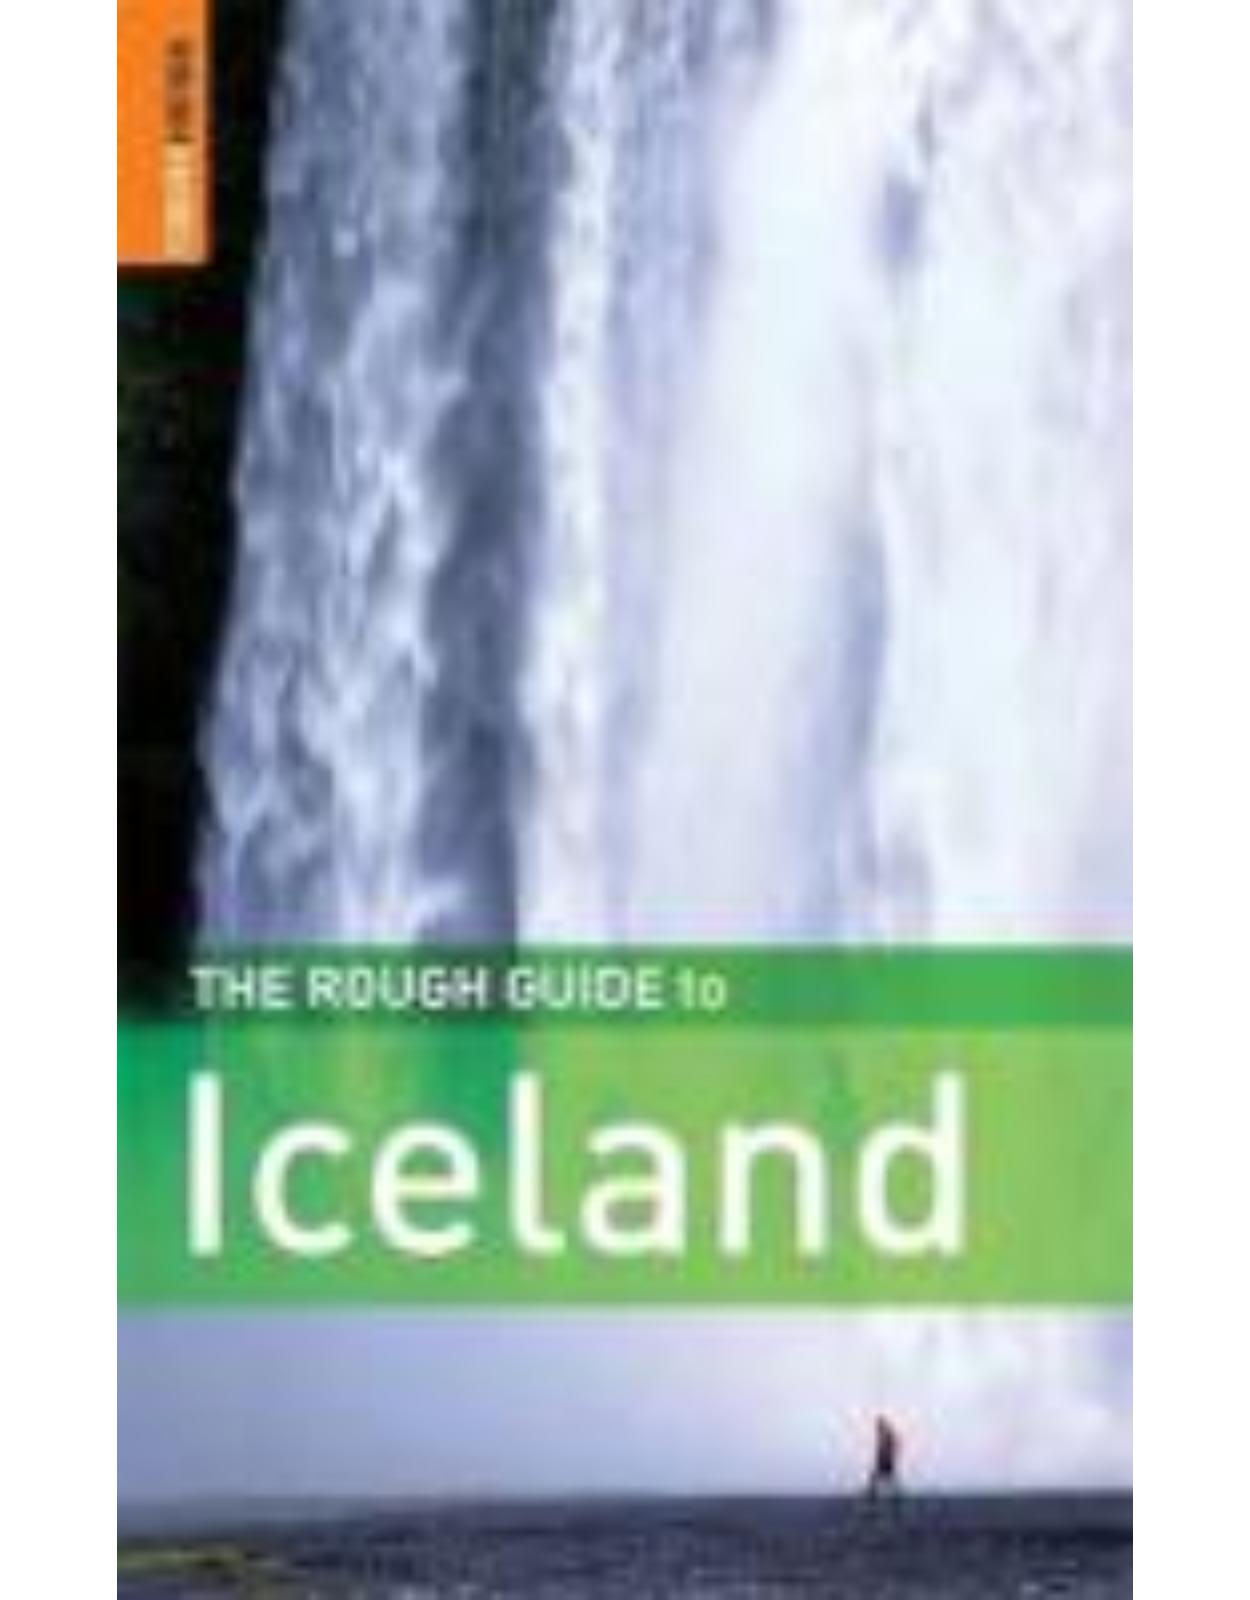 The Rough Guide to Iceland